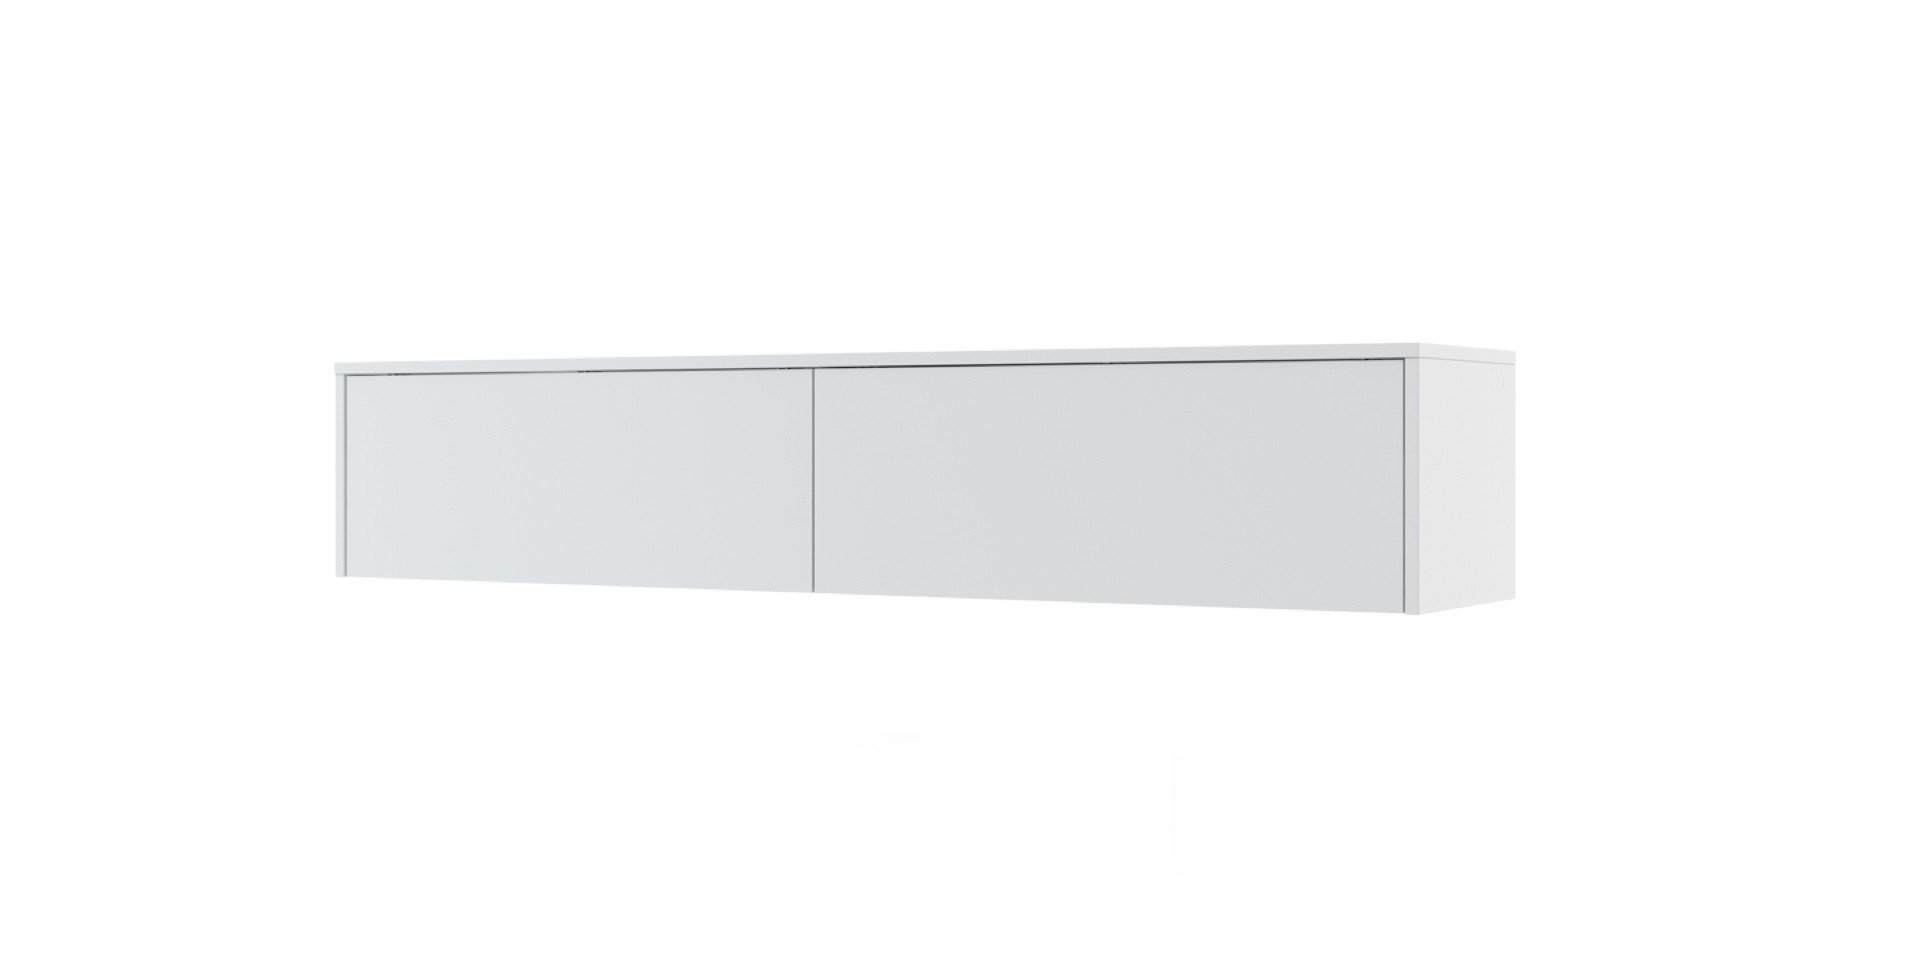 View BC15 Over Bed Unit for Horizontal Wall Bed Concept 160cm White Matt 211cm information